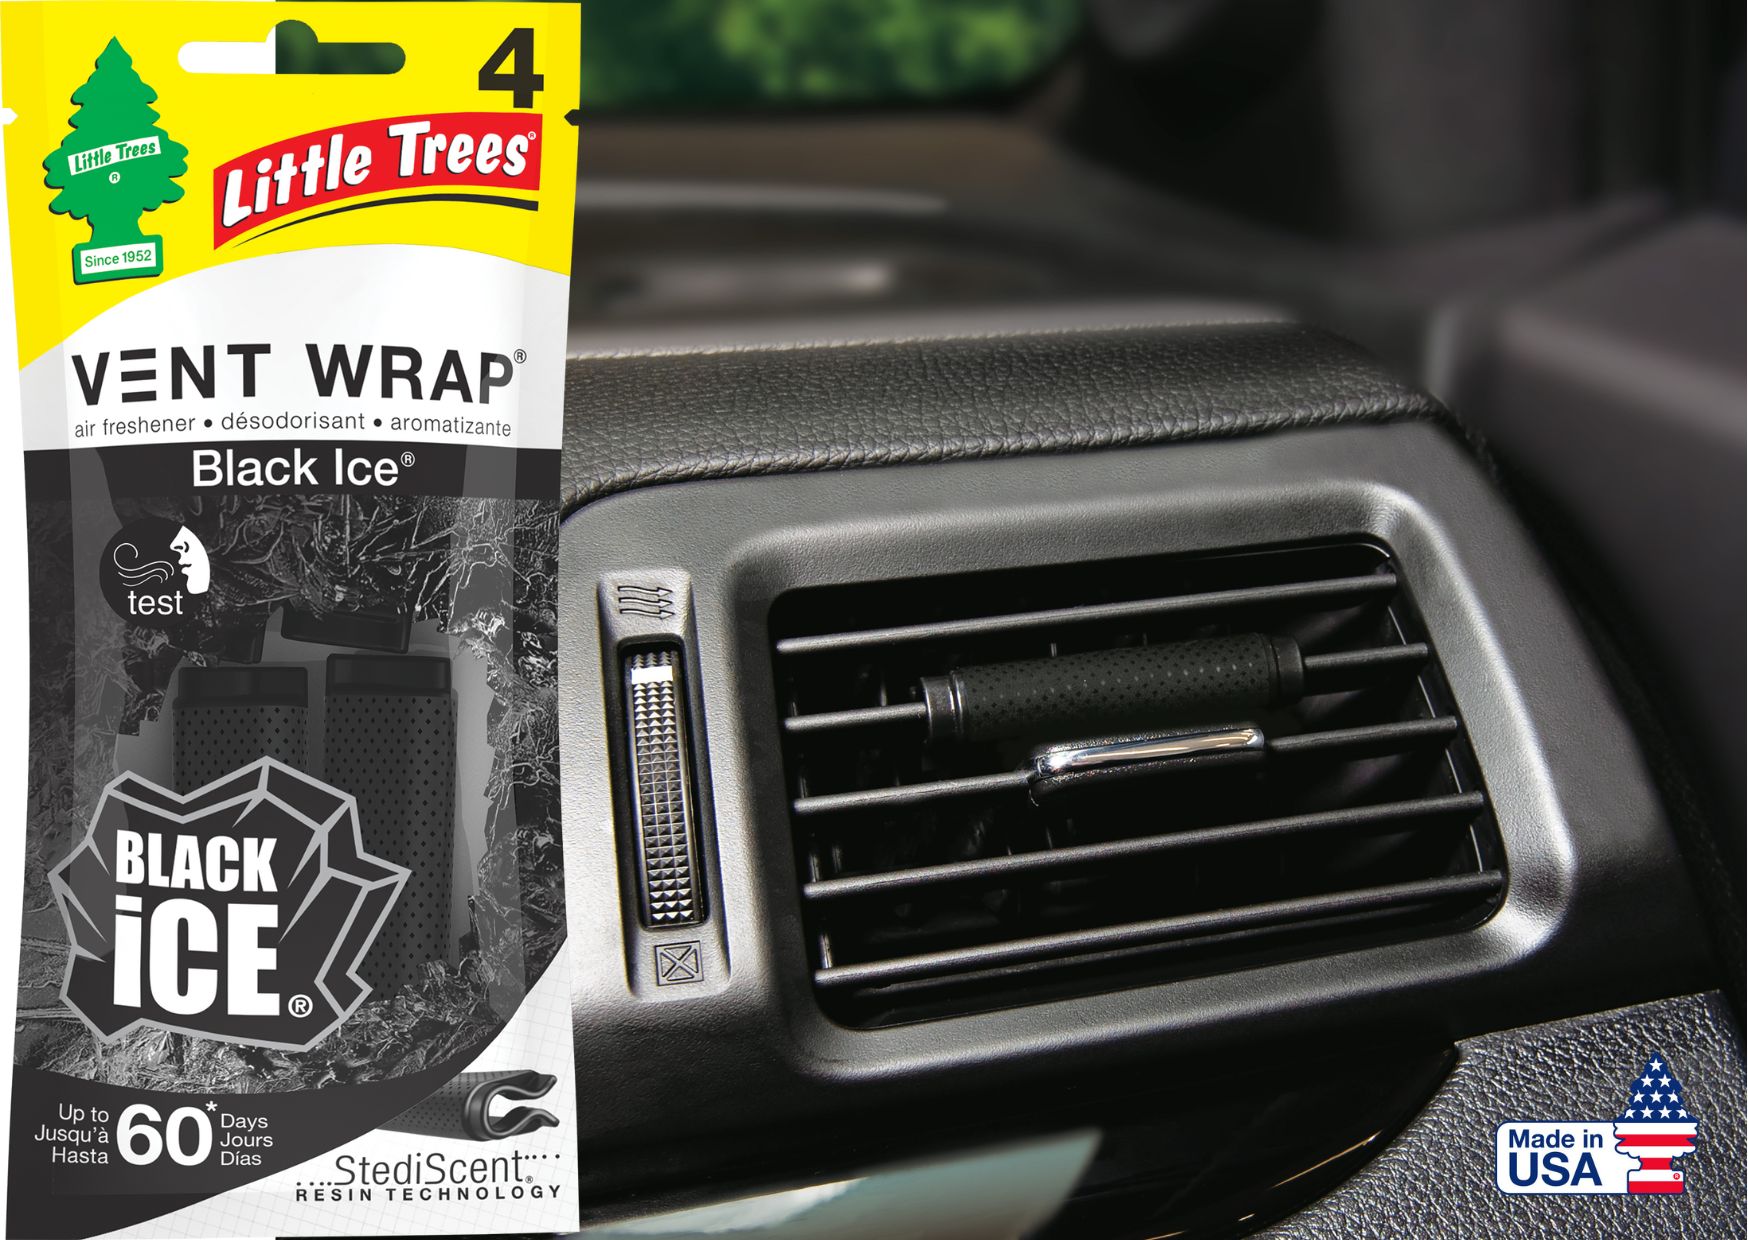 Little Trees Vent Wraps: Game changing car air freshner